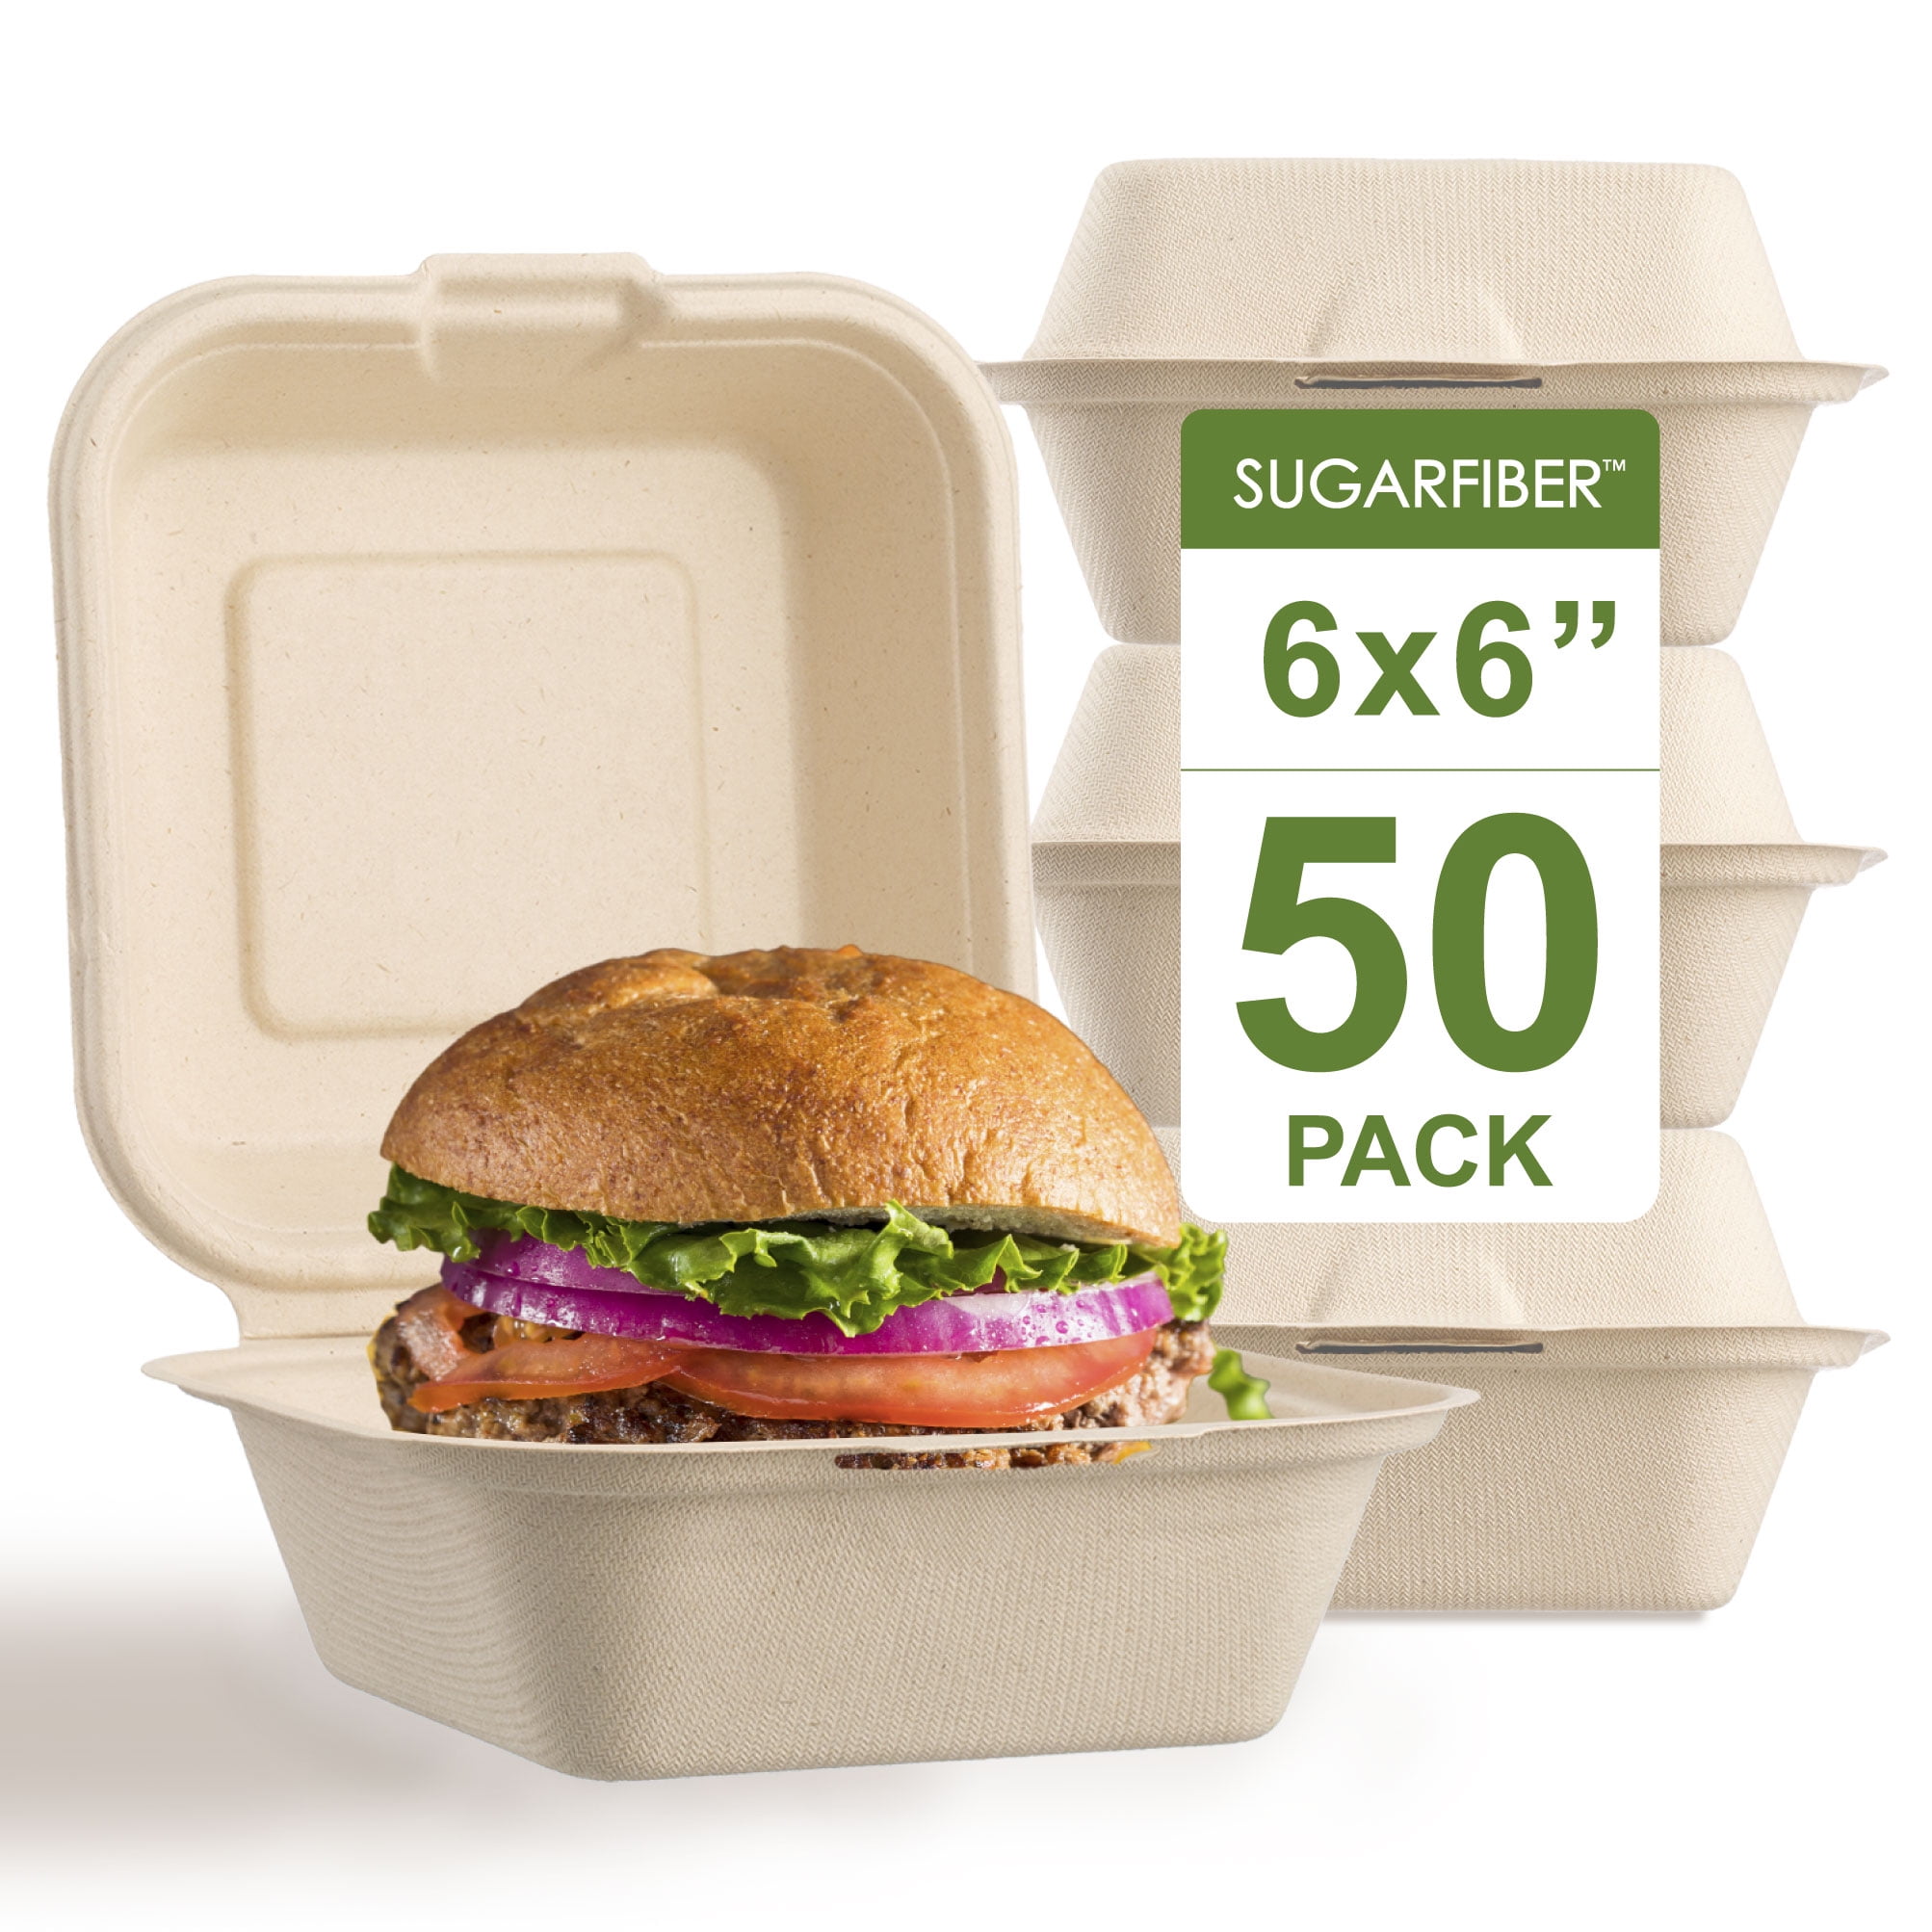 100% Compostable Food Container Box with Dividers Eco-Friendly